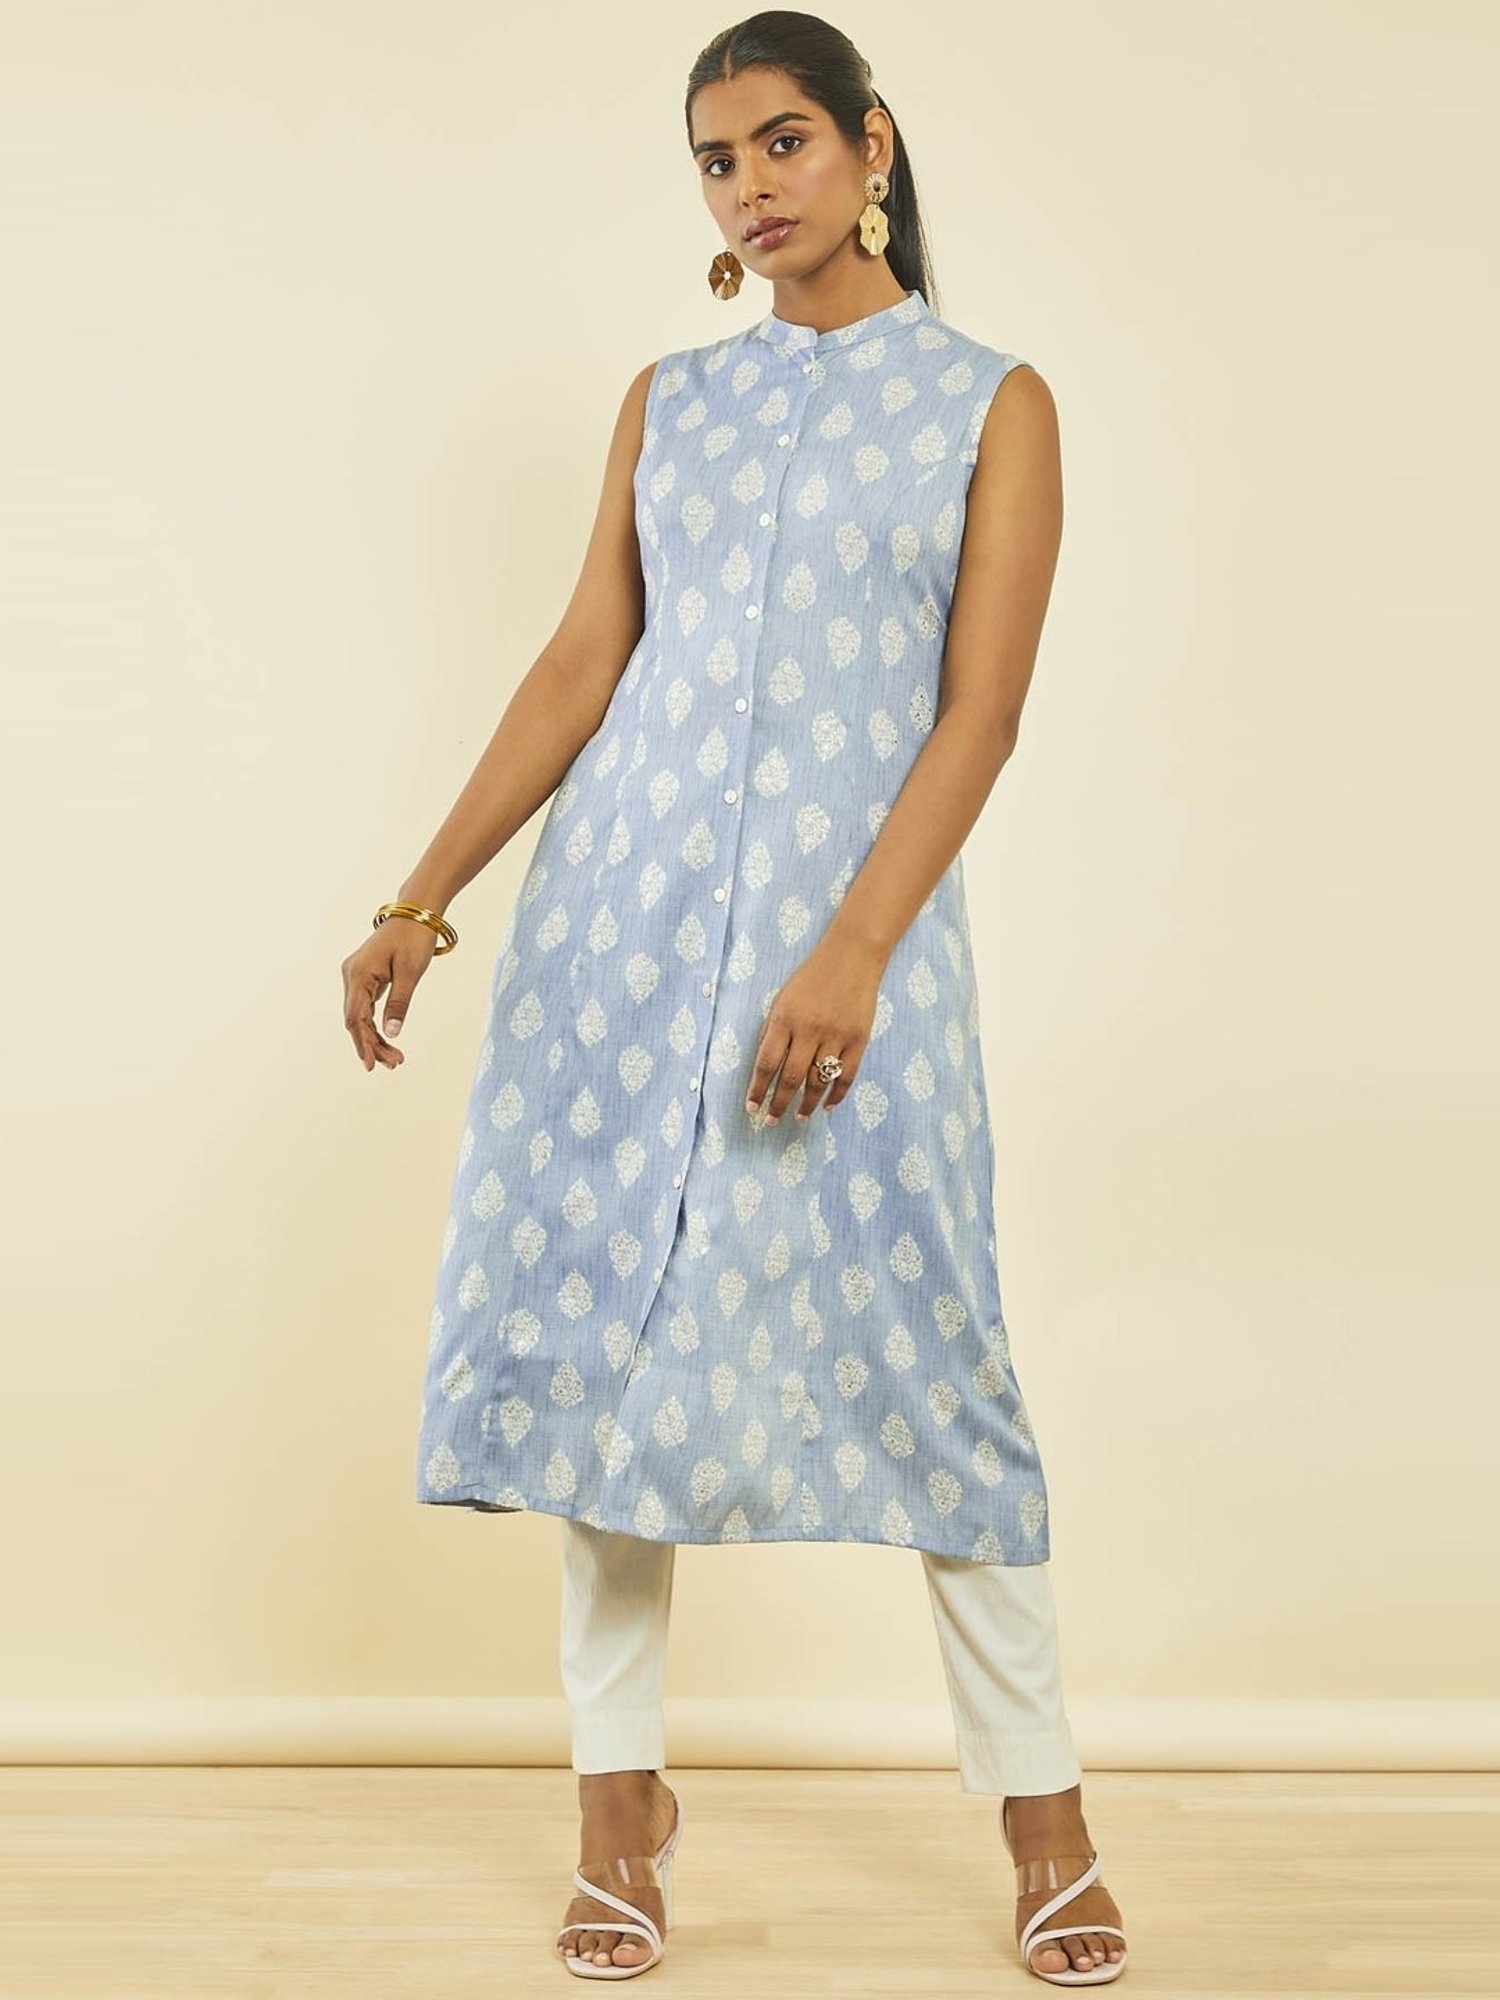 Shop online our Blue Cotton Anarkali Kurta With Printed Motifs And Gota  Patti for women at Soch India